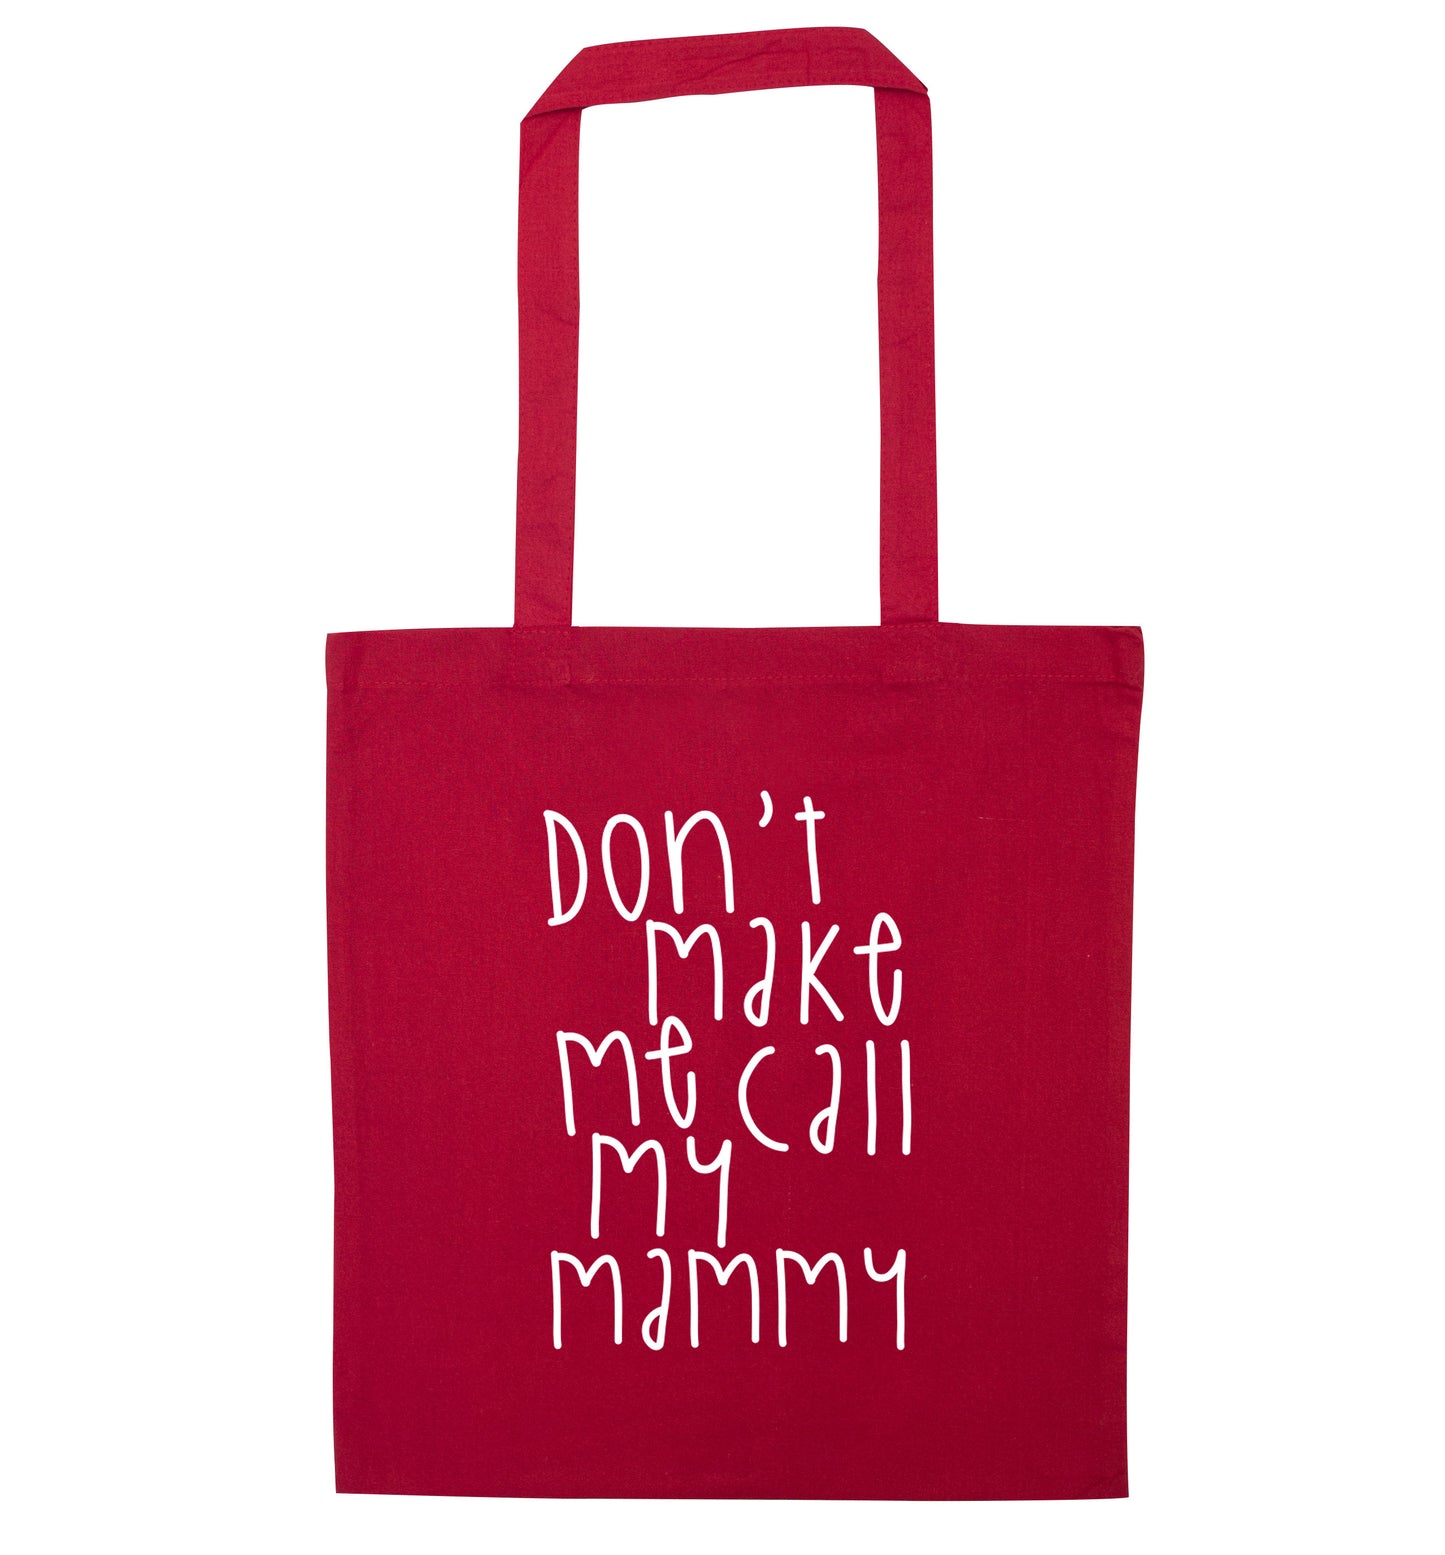 Don't make me call my mammy red tote bag